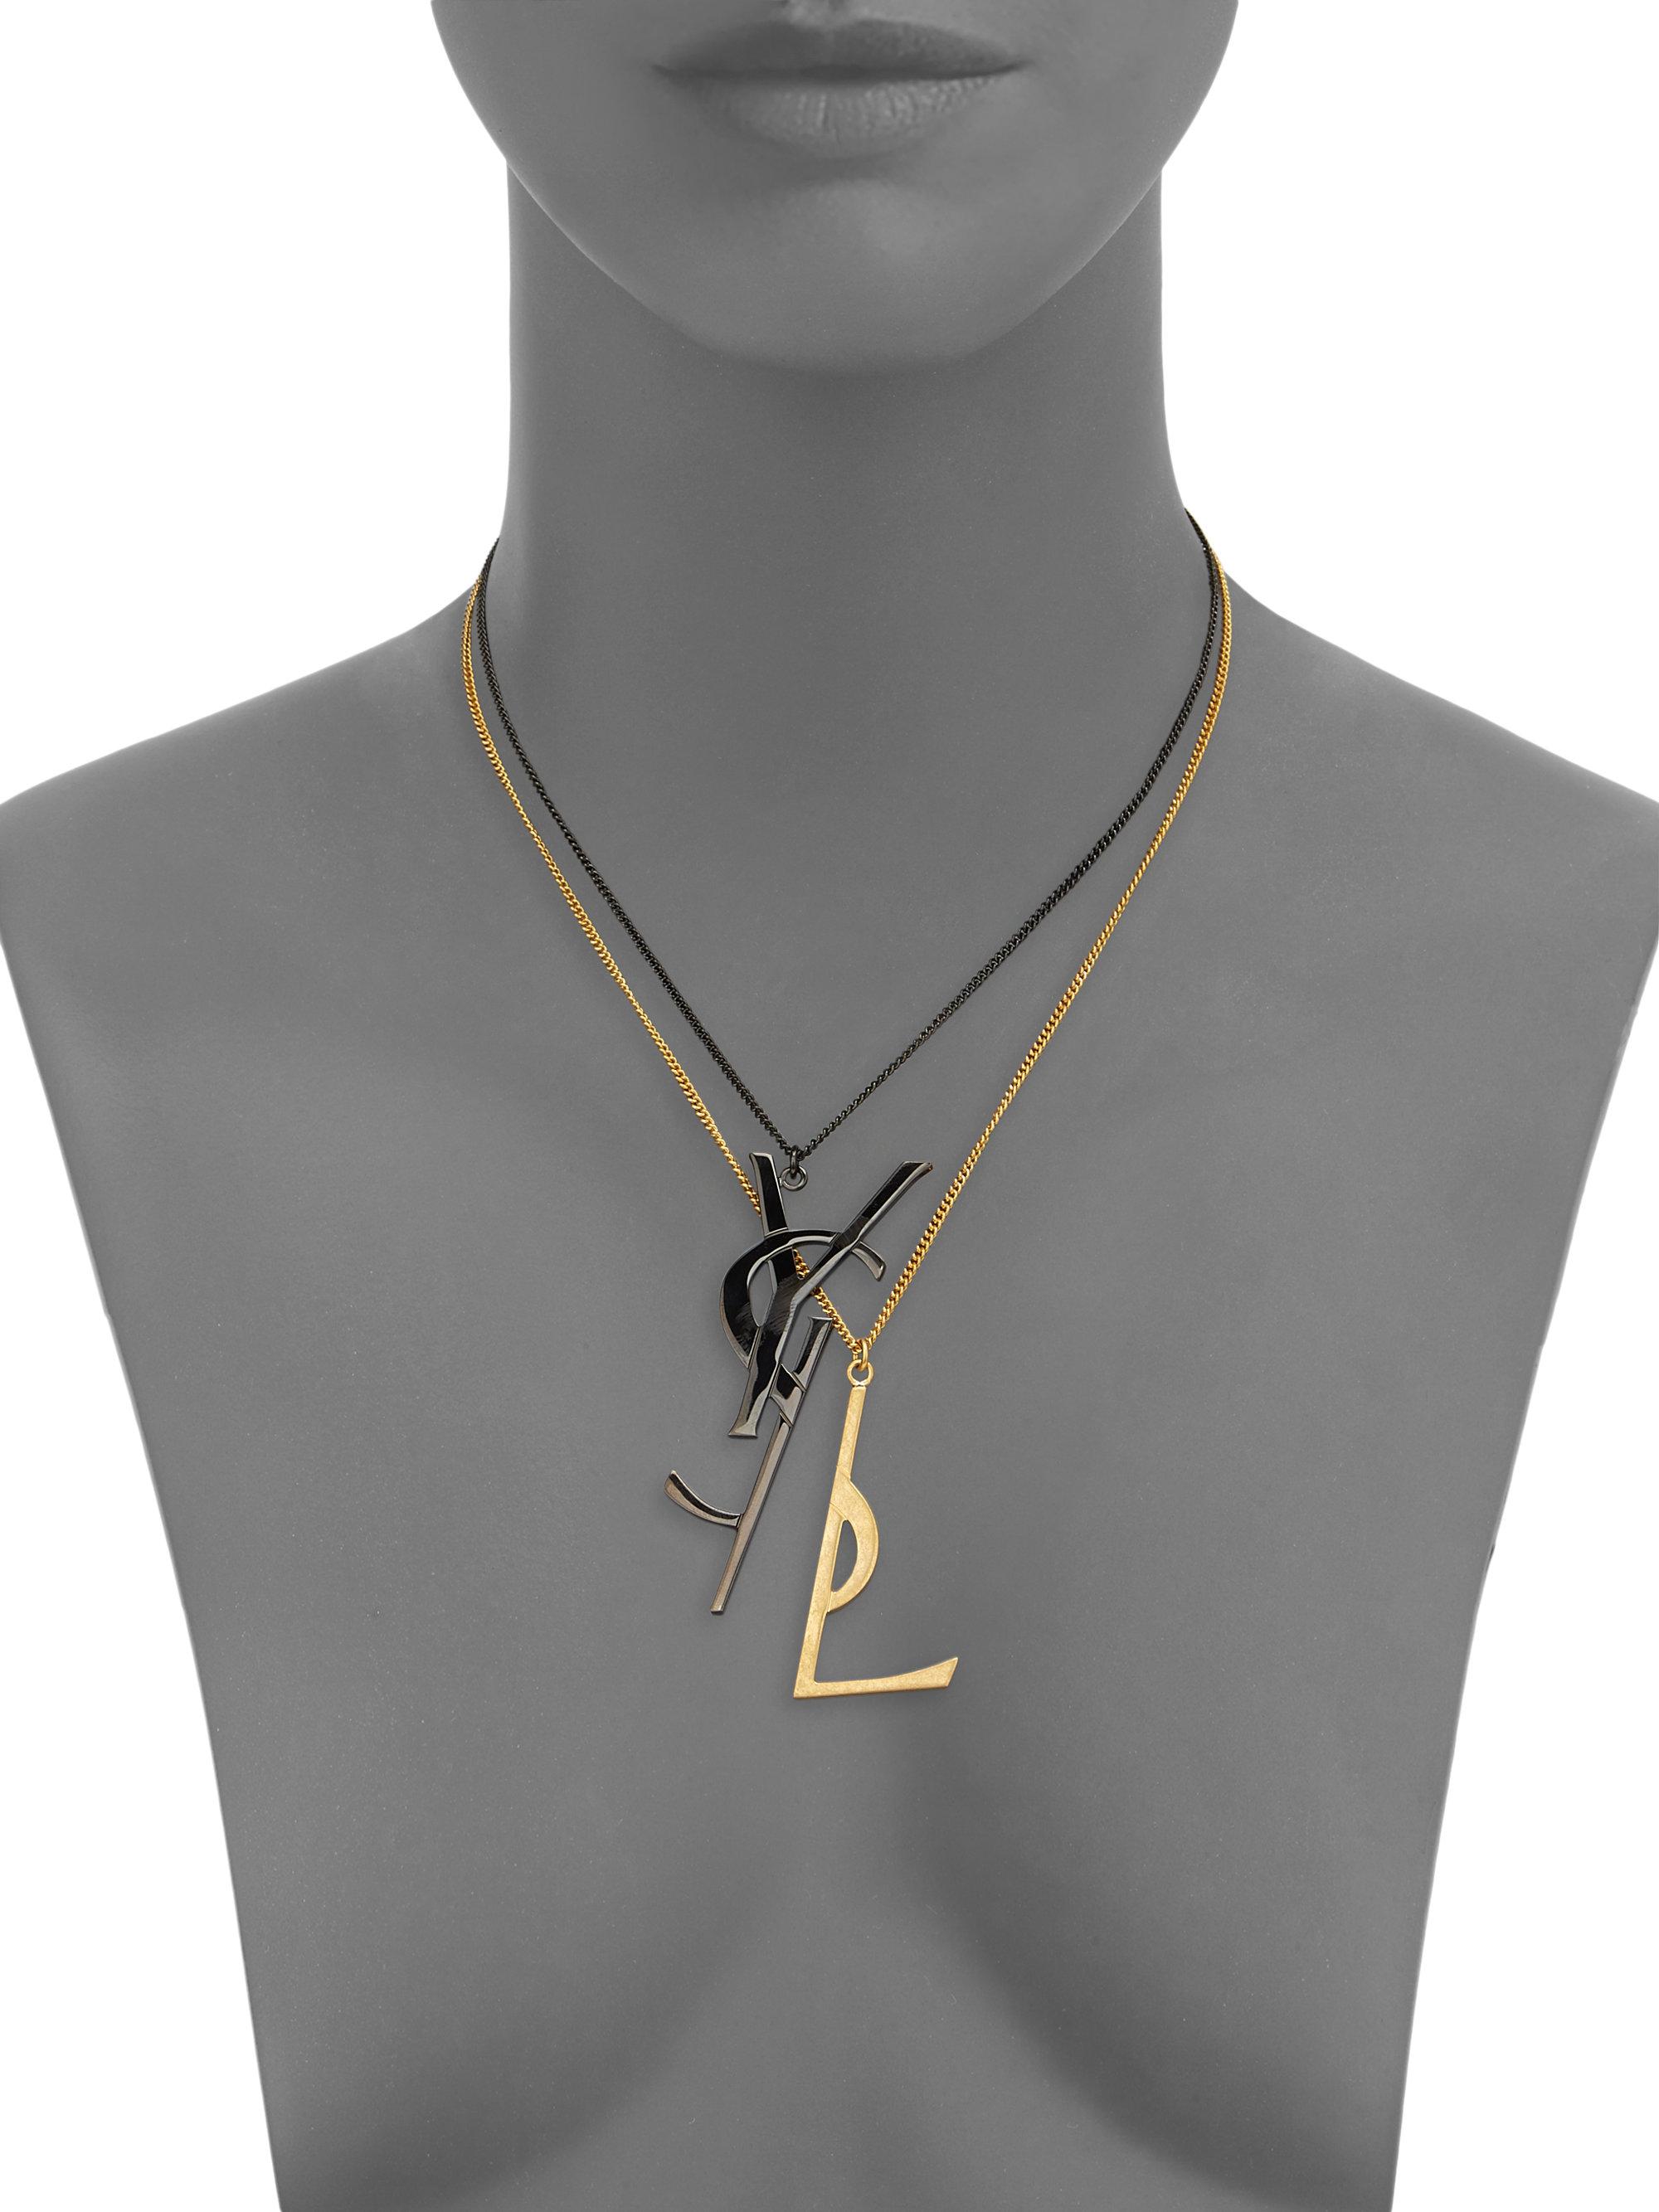 Saint Laurent Ysl Two-tone Layered Necklace in Metallic | Lyst